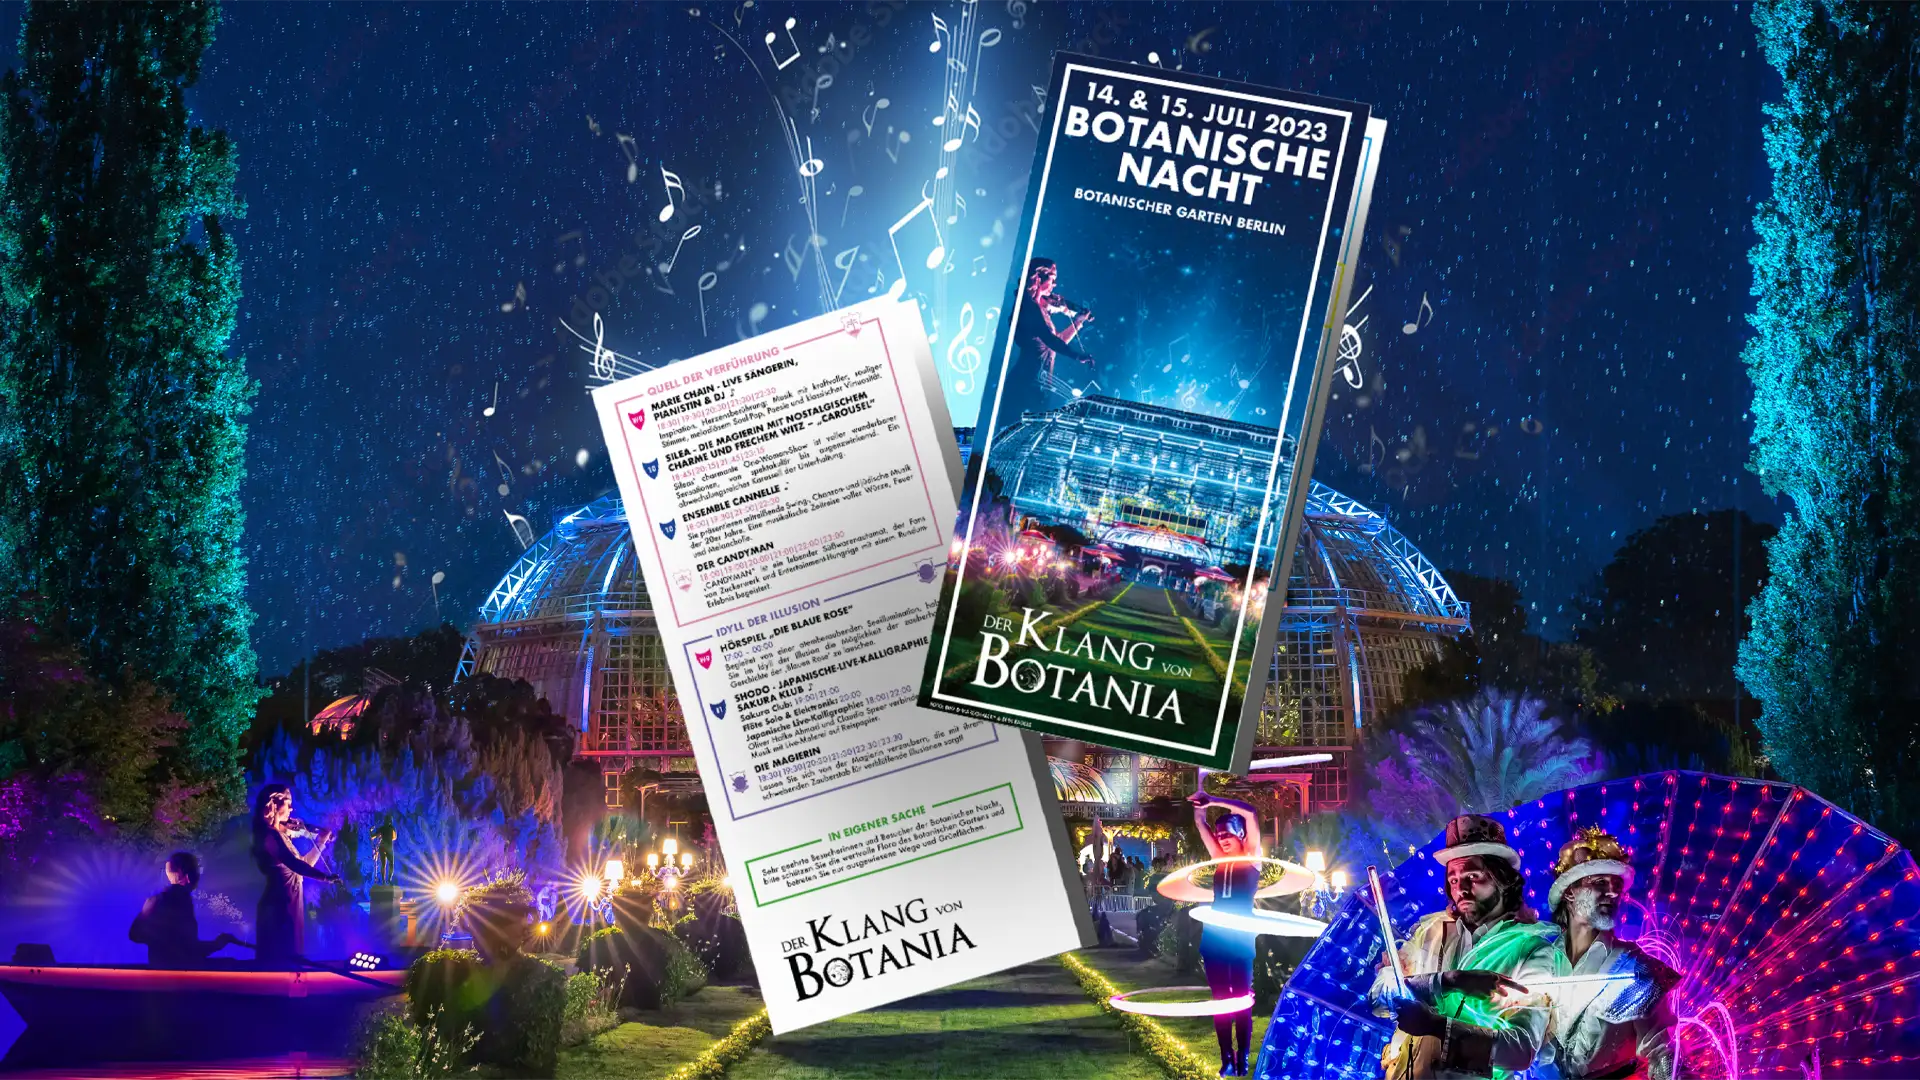 A picture shows the flyer of the Botanical Night at the Botanical Garden in Berlin.